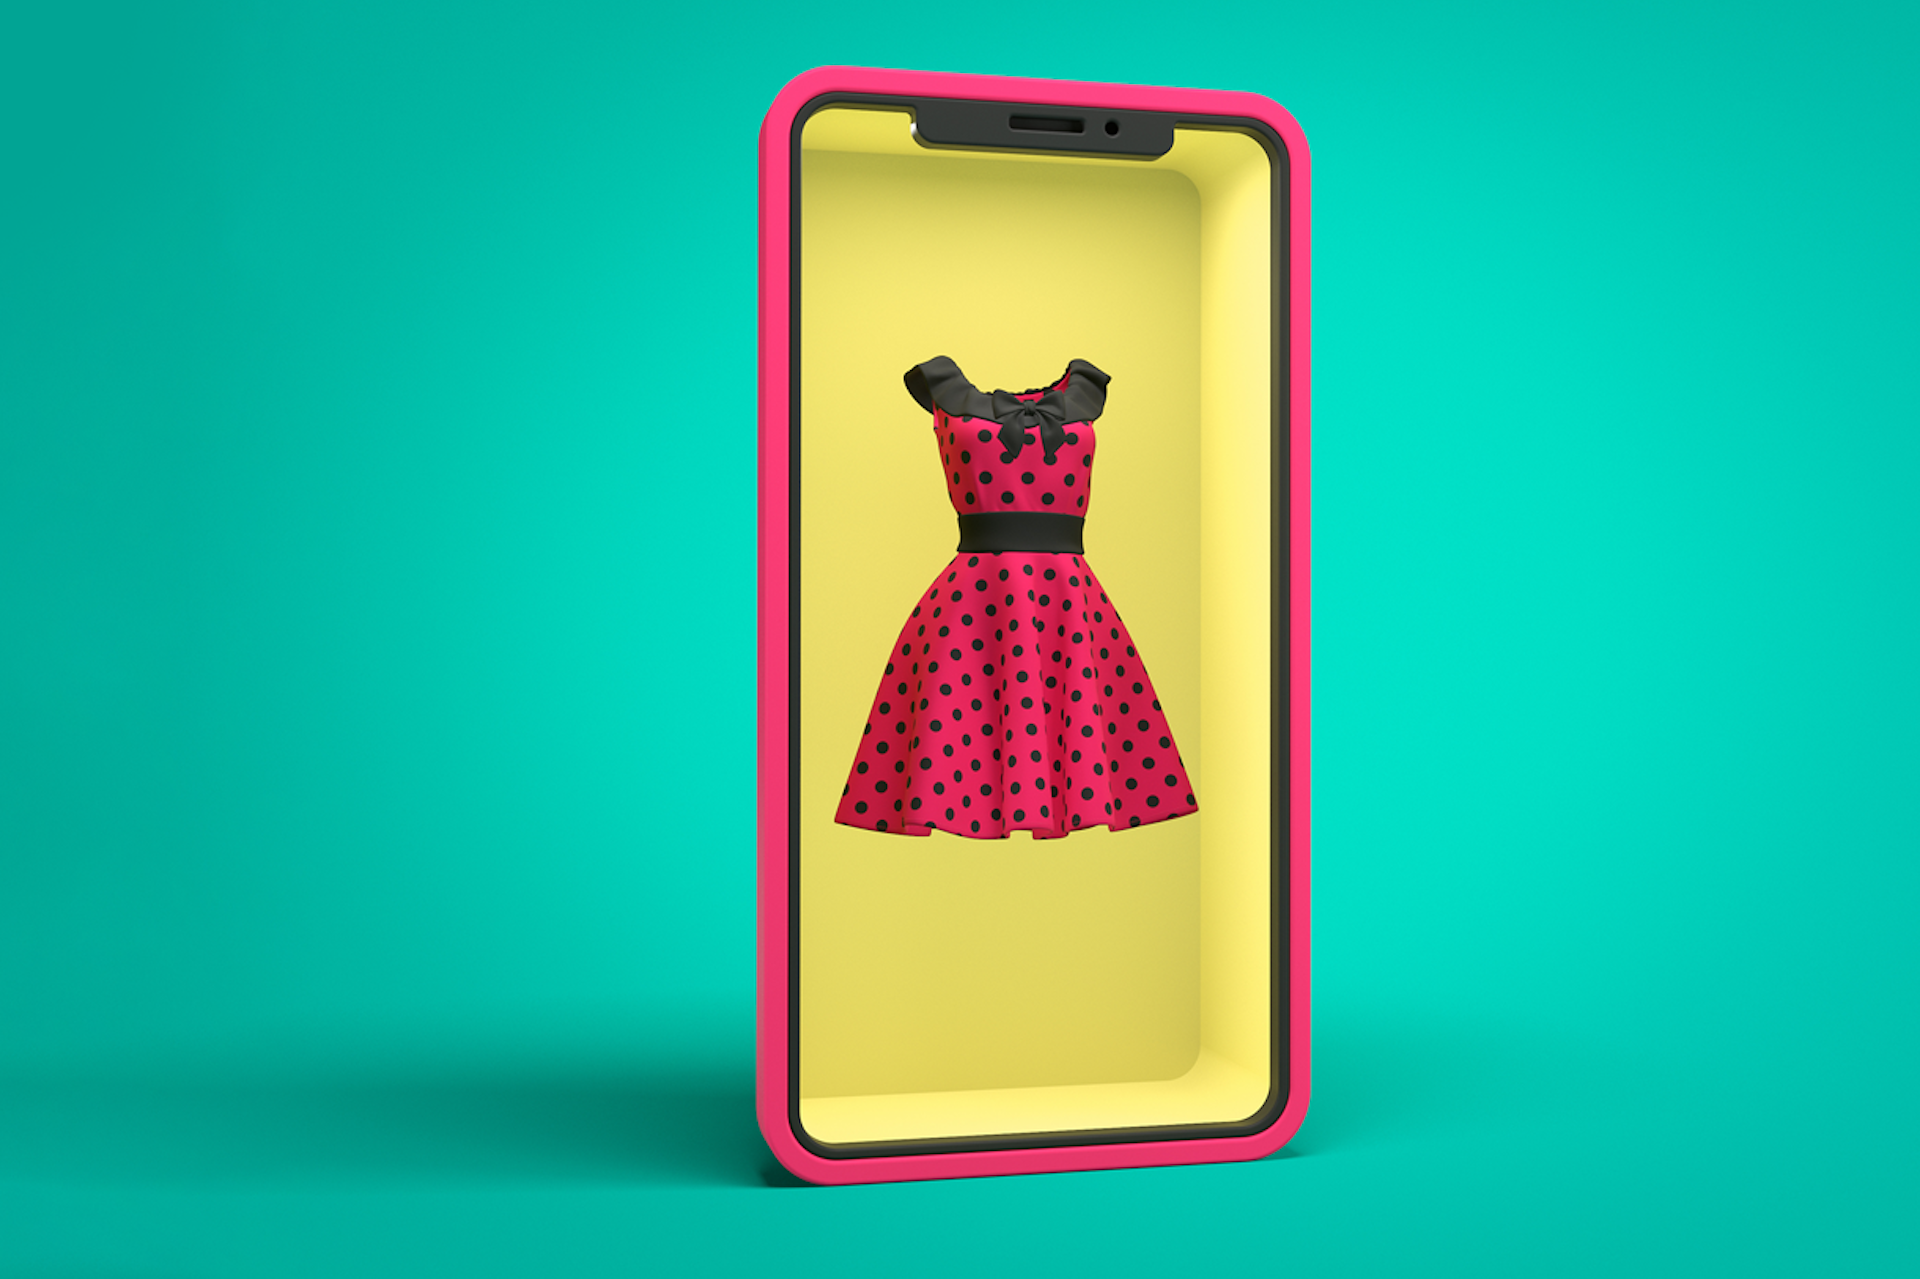 Image showing a red dress with black polkadots inside a phone, on a bright green background. Blog post on live shopping for brands. 